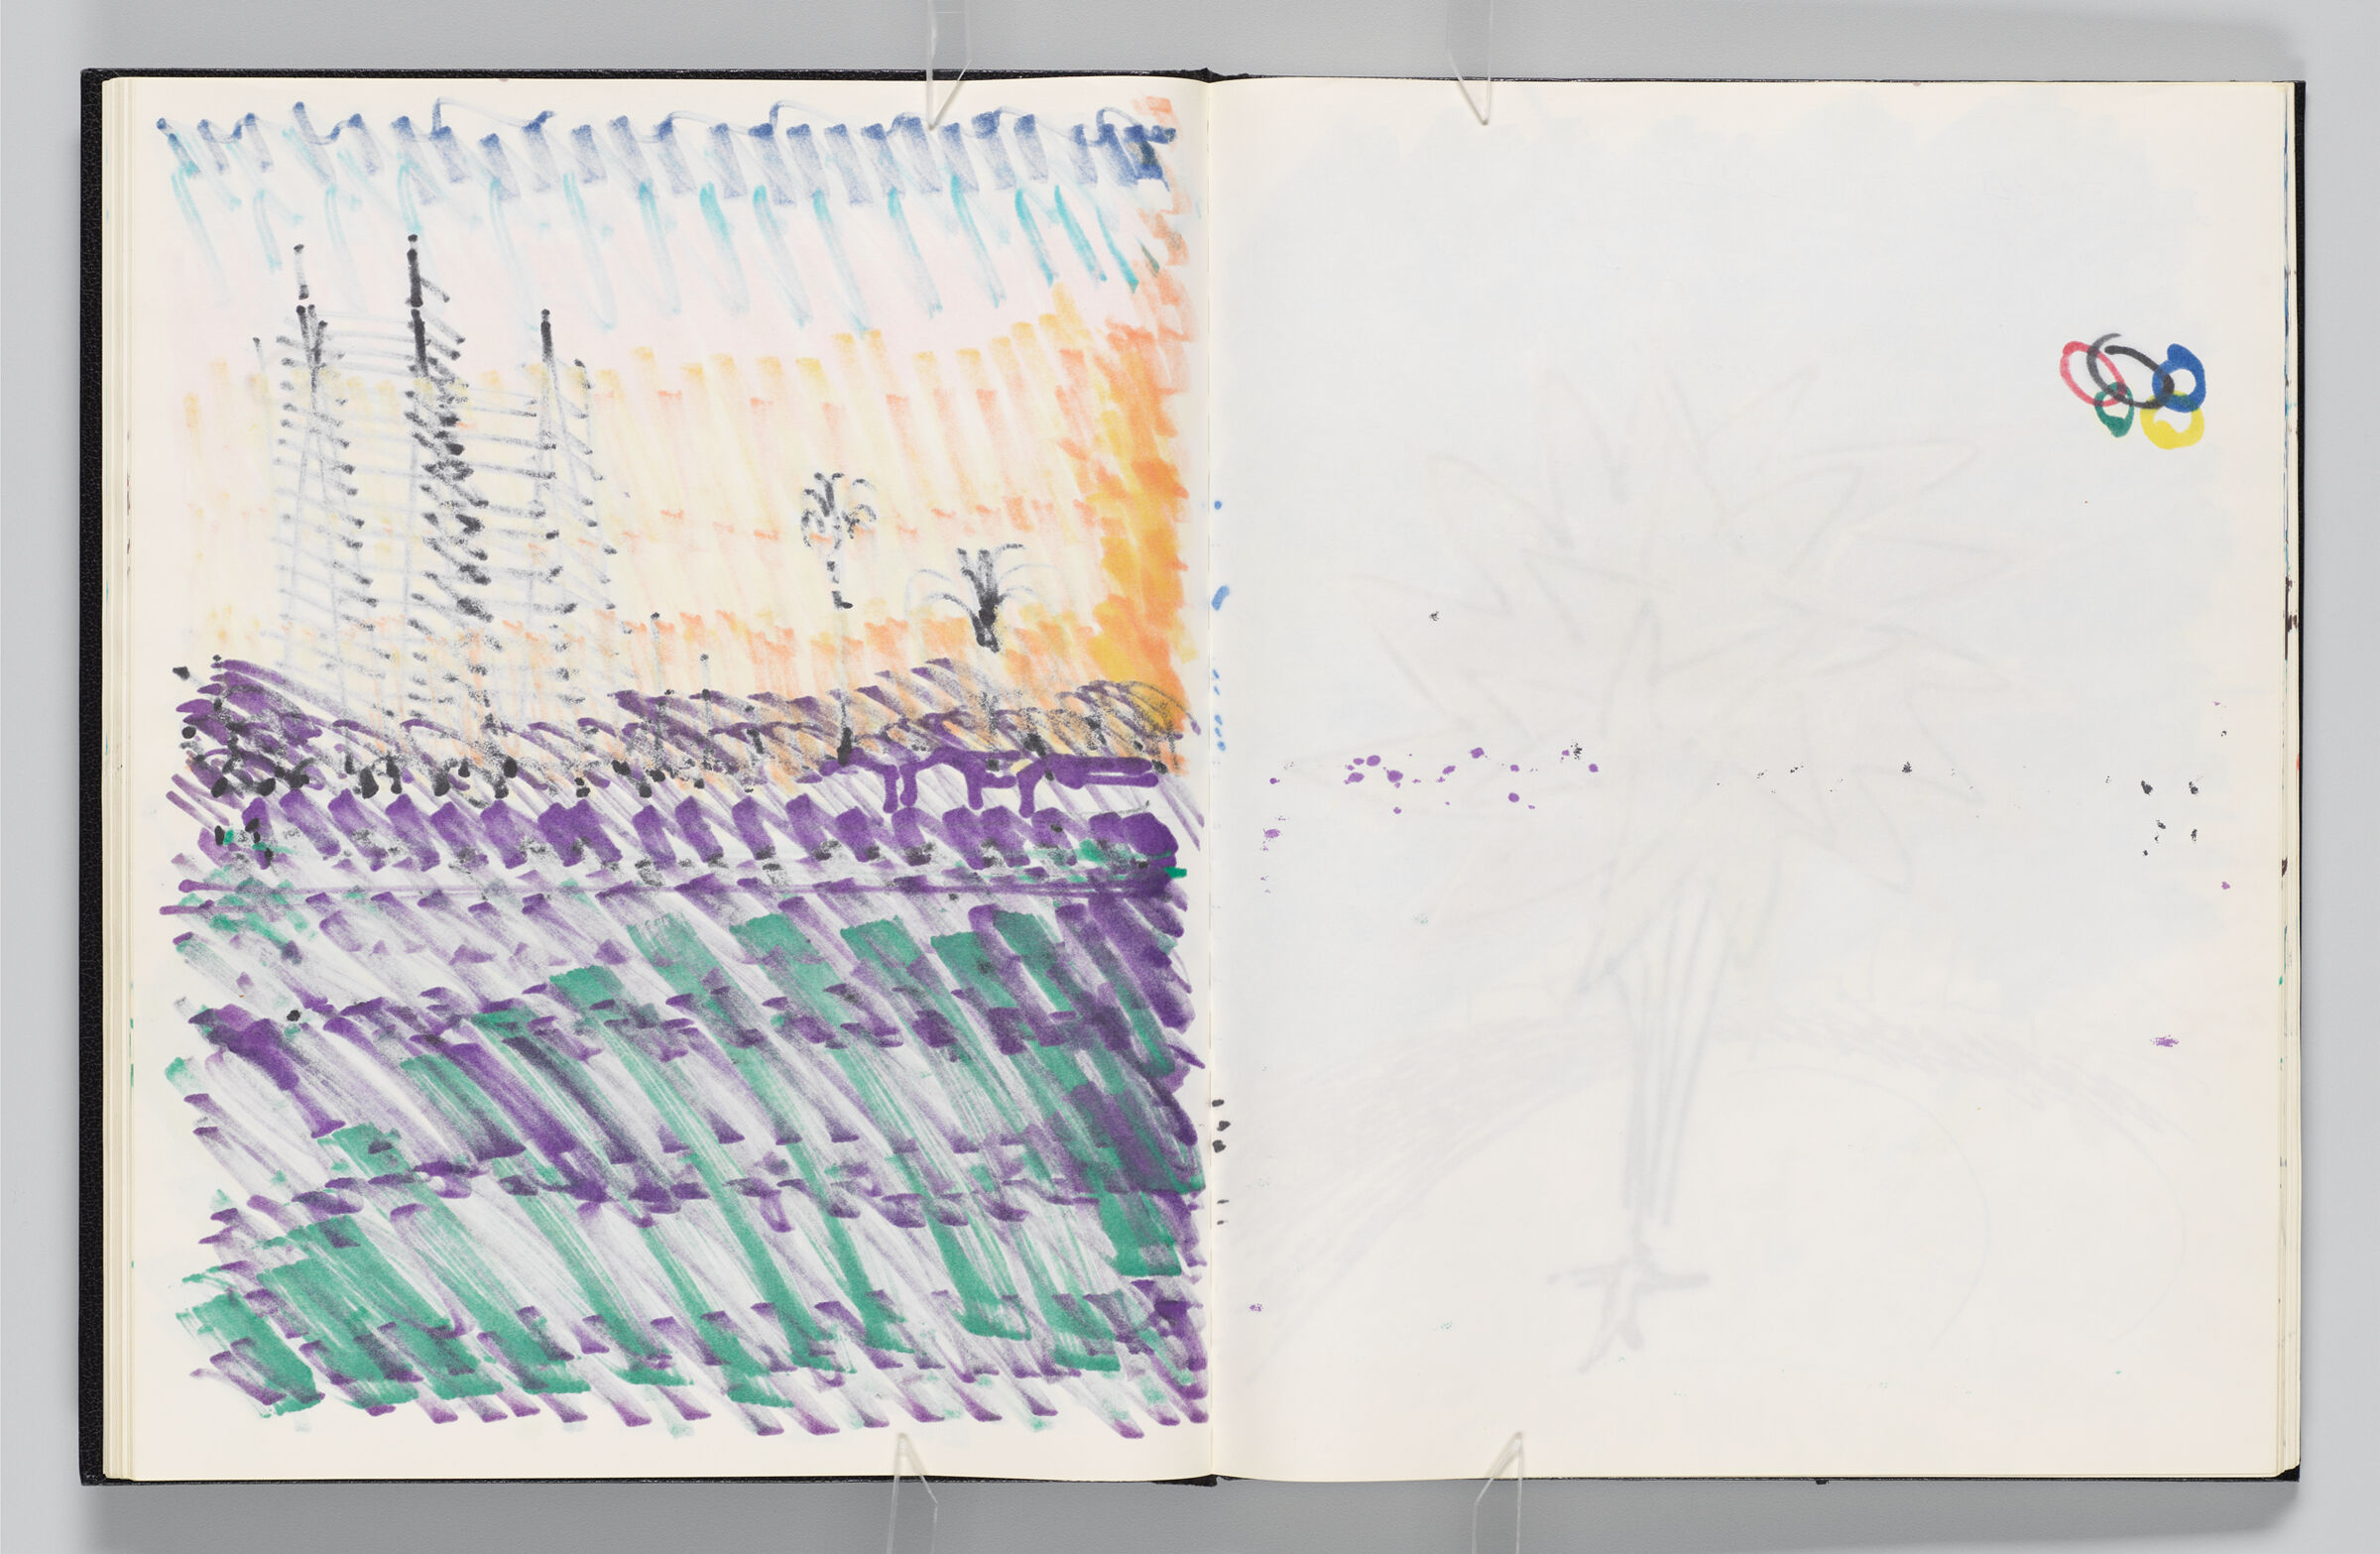 Untitled (Bleed-Through Of Previous Page, Left Page); Untitled (Bleed-Through Of Following Page And Color Transfer, Right Page)